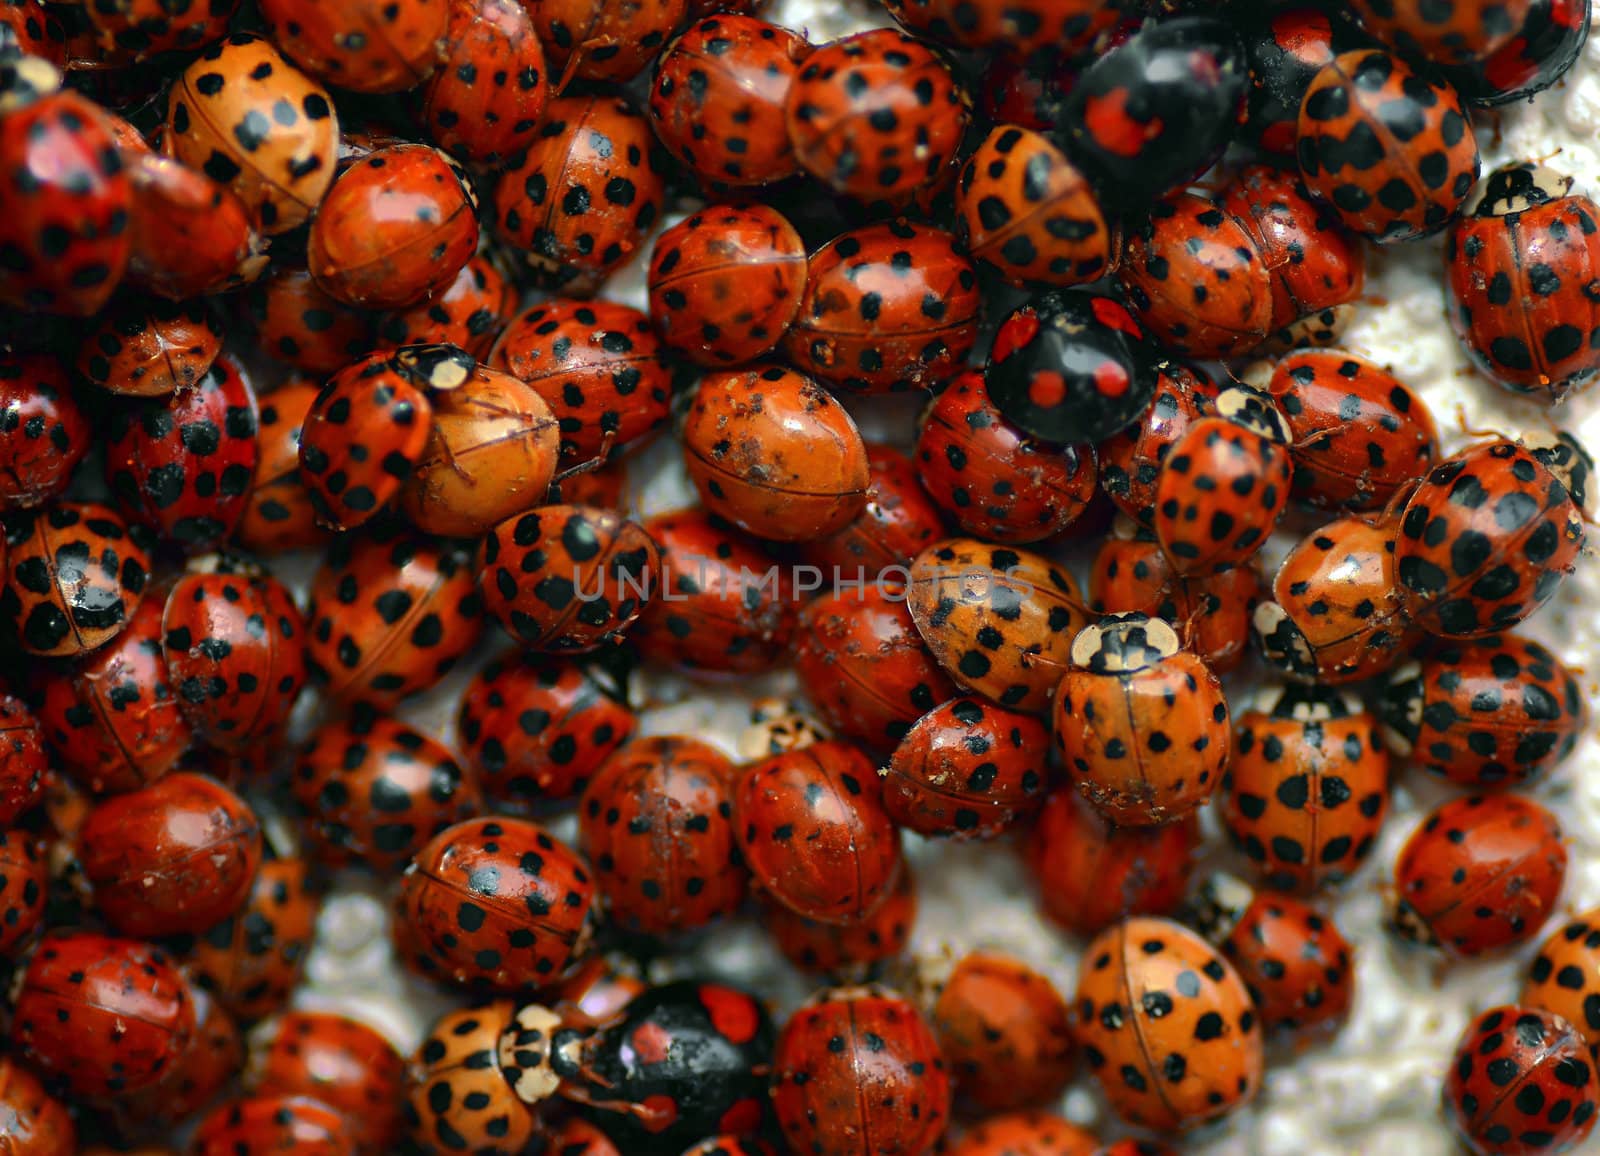 Red ladybugs by Vectorex